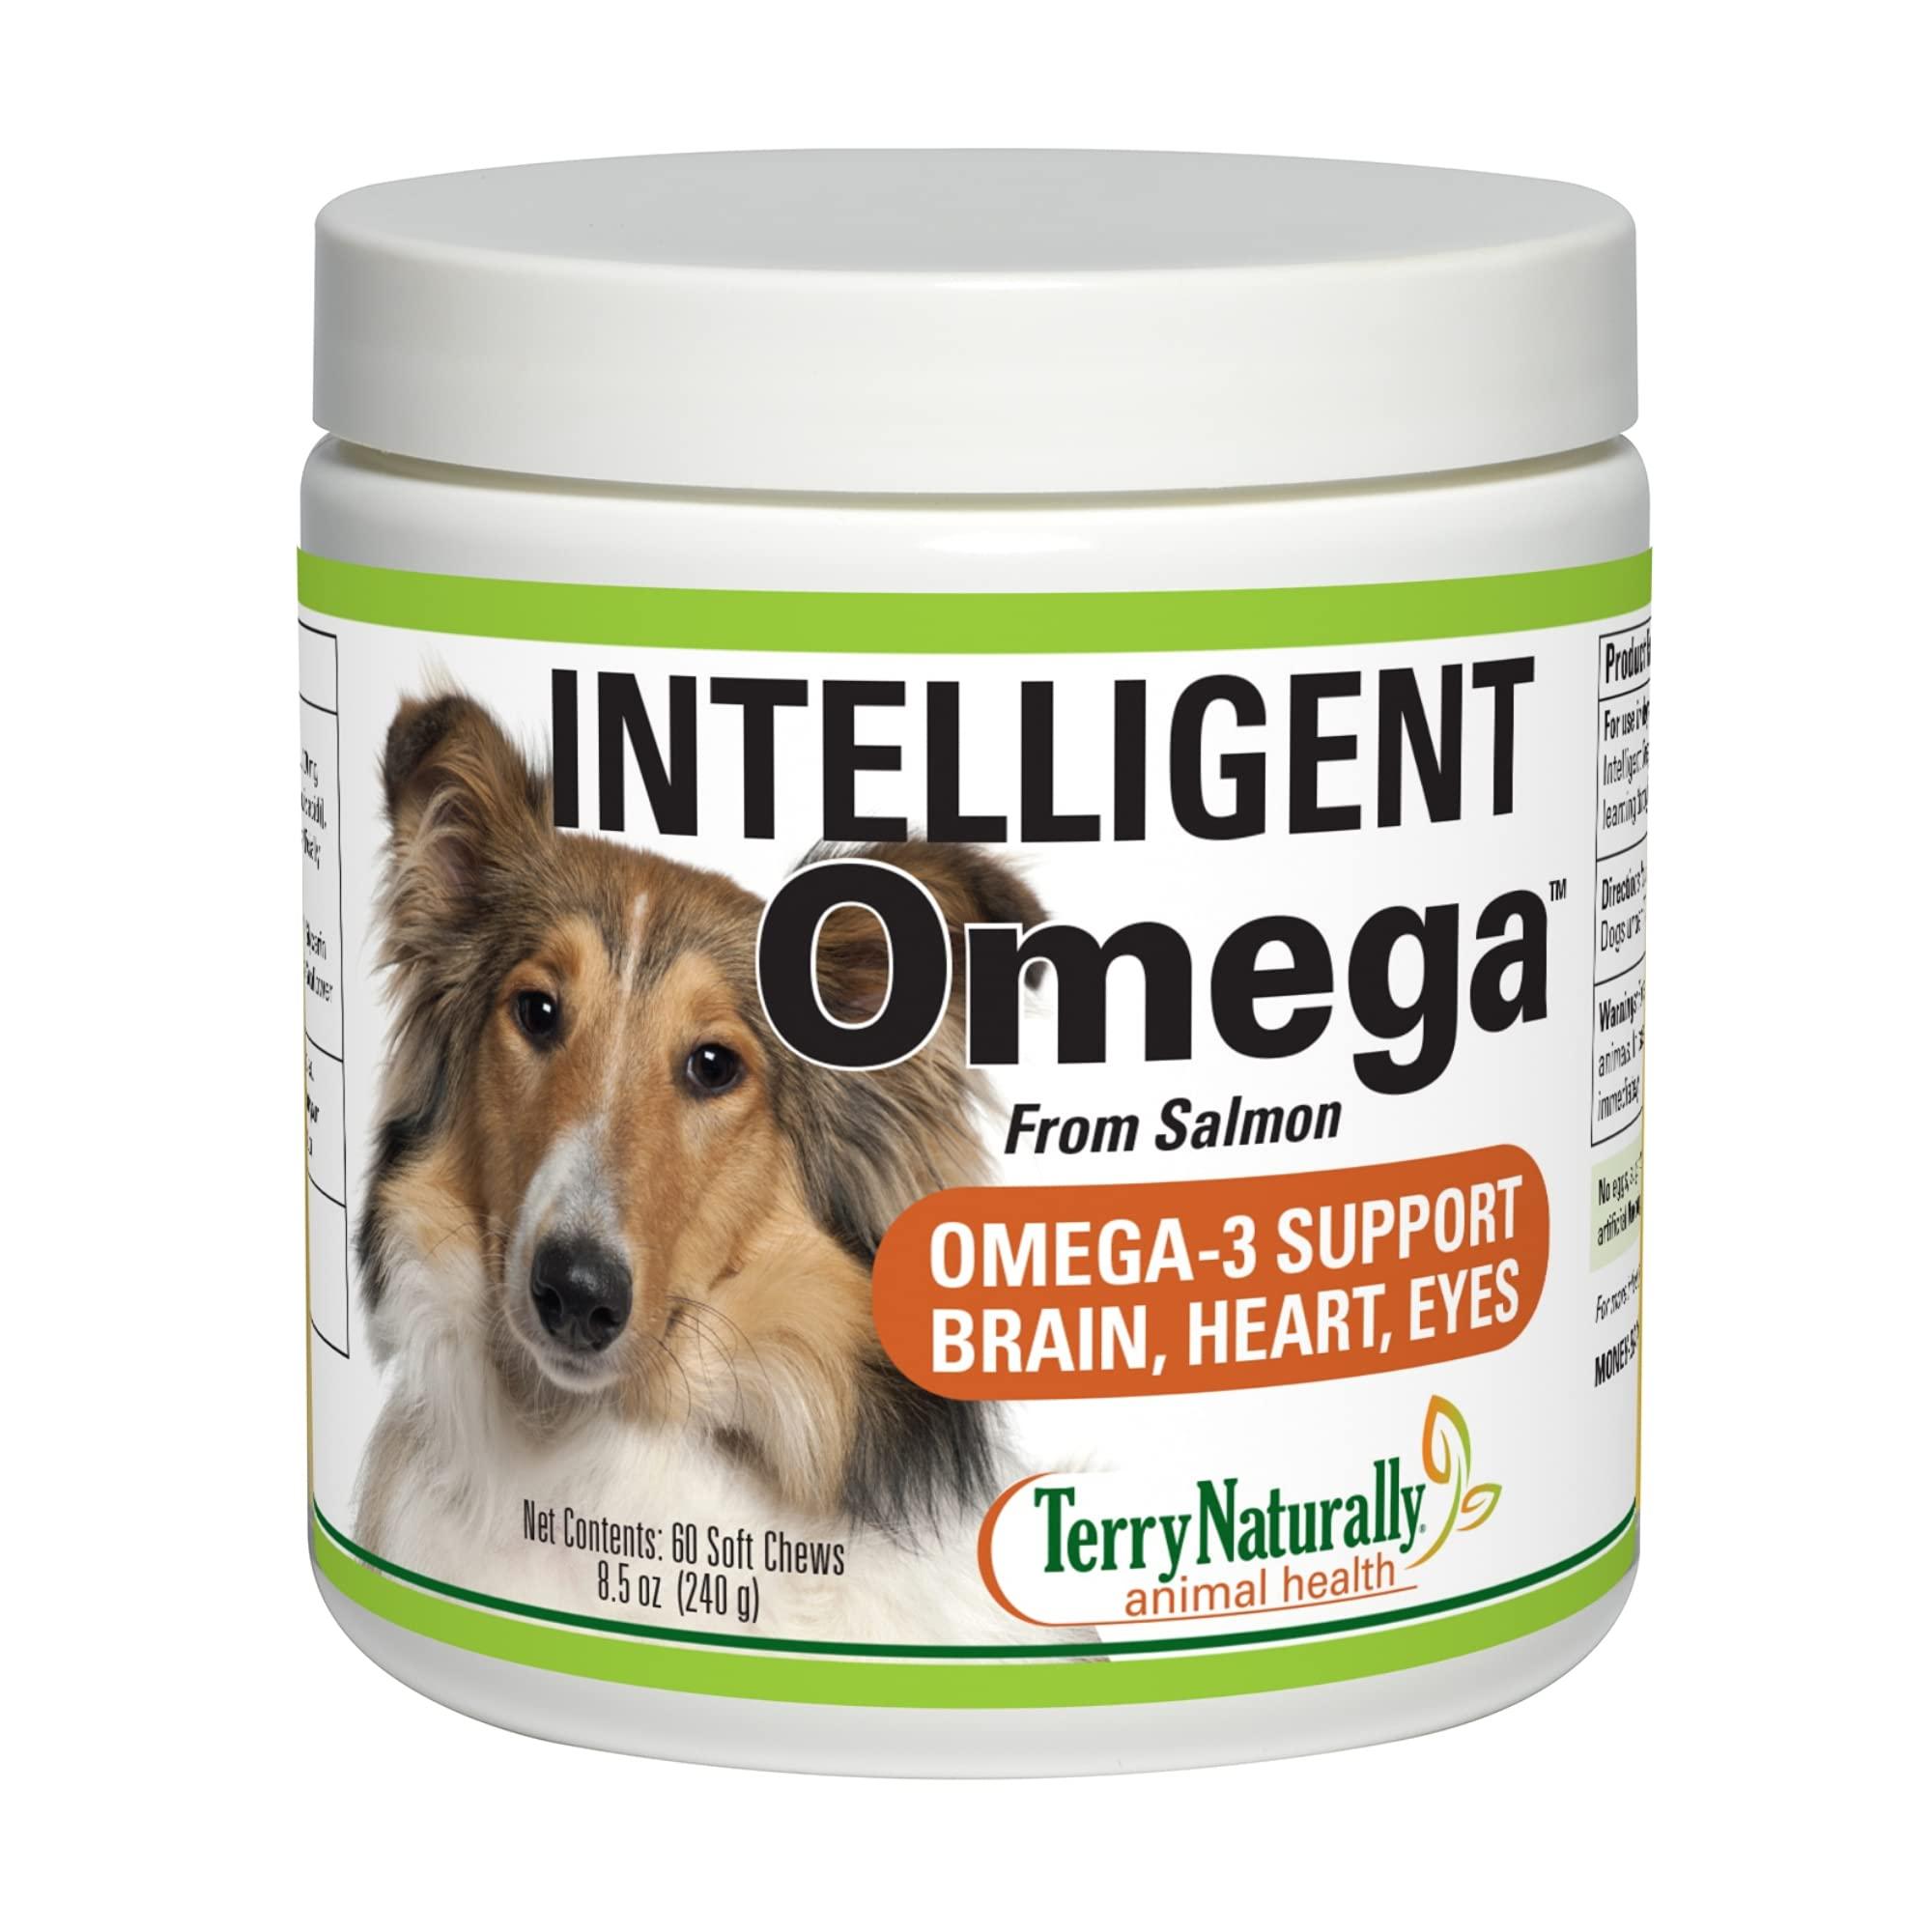 Terry Naturally Animal Health Intelligent Omega - 60 Soft Chews - Omega 3, Salmon Oil for Dogs, Promotes Brain, Heart & Eye Health - Canine Only - 60 Servings